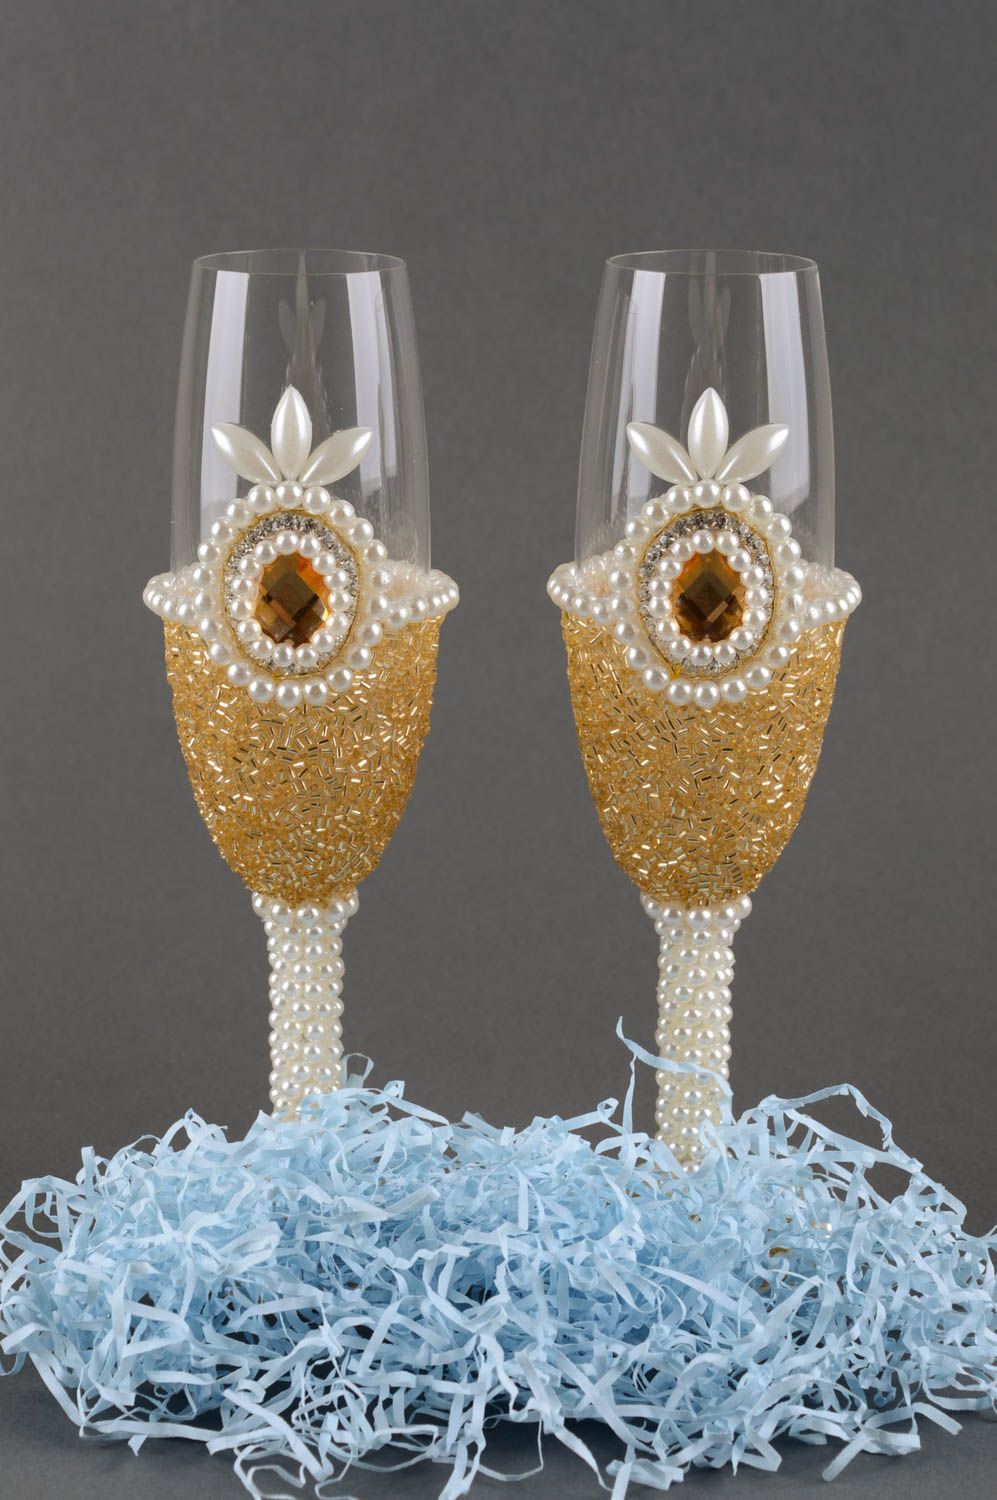 Wedding champagne glasses wedding accessories gifts for wedding drinking glasses photo 5